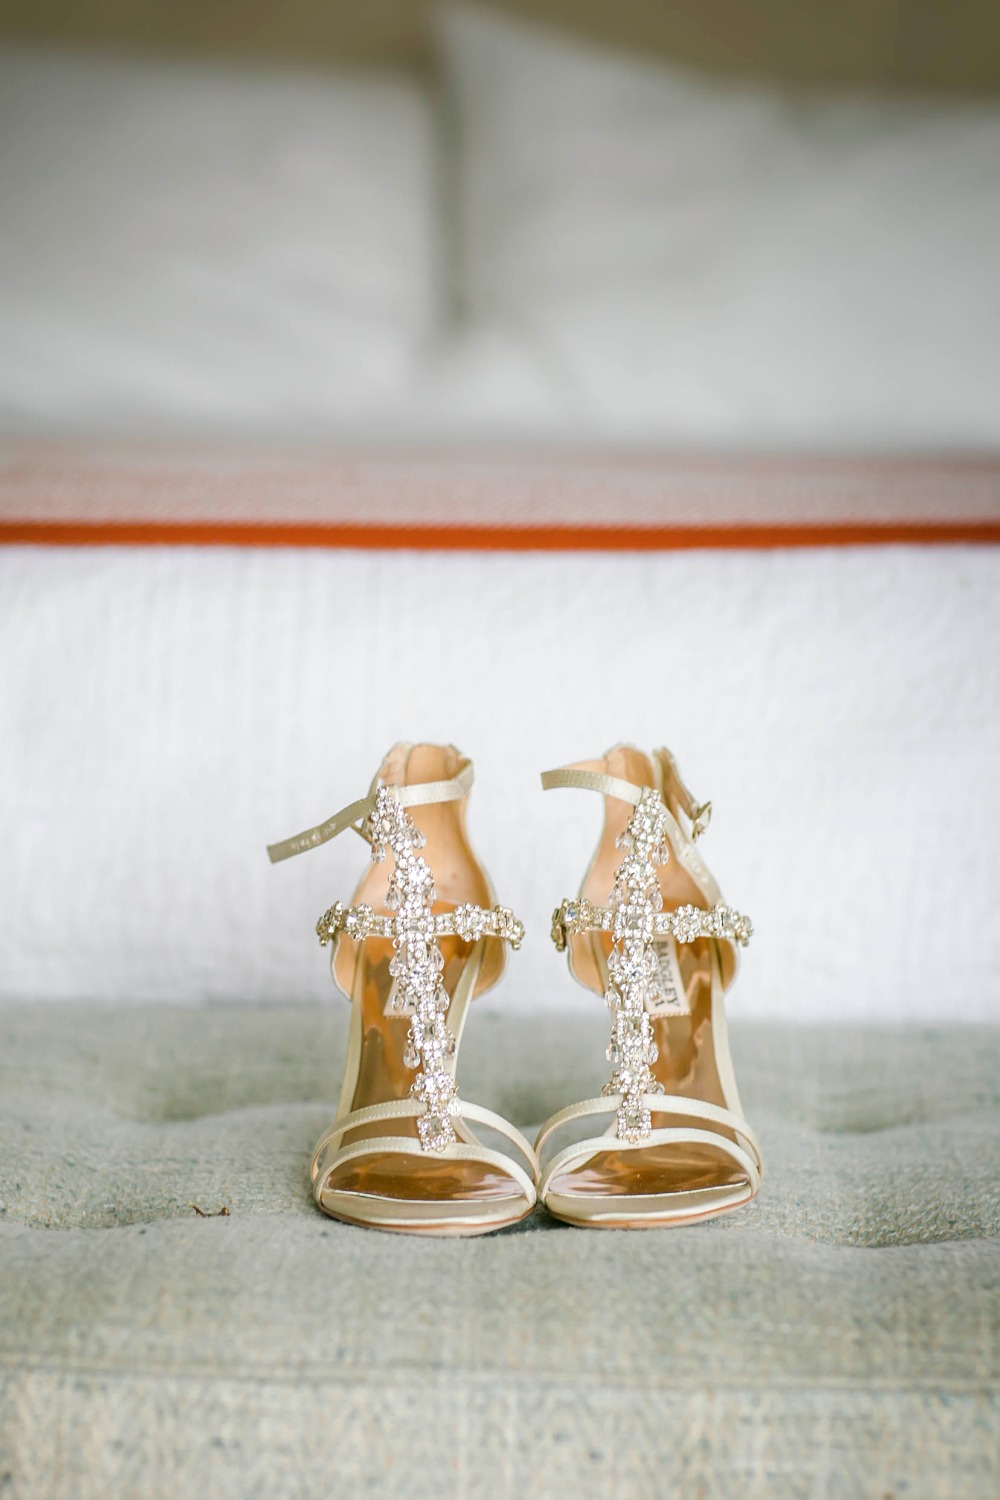 wedding-submission-from-sanderling